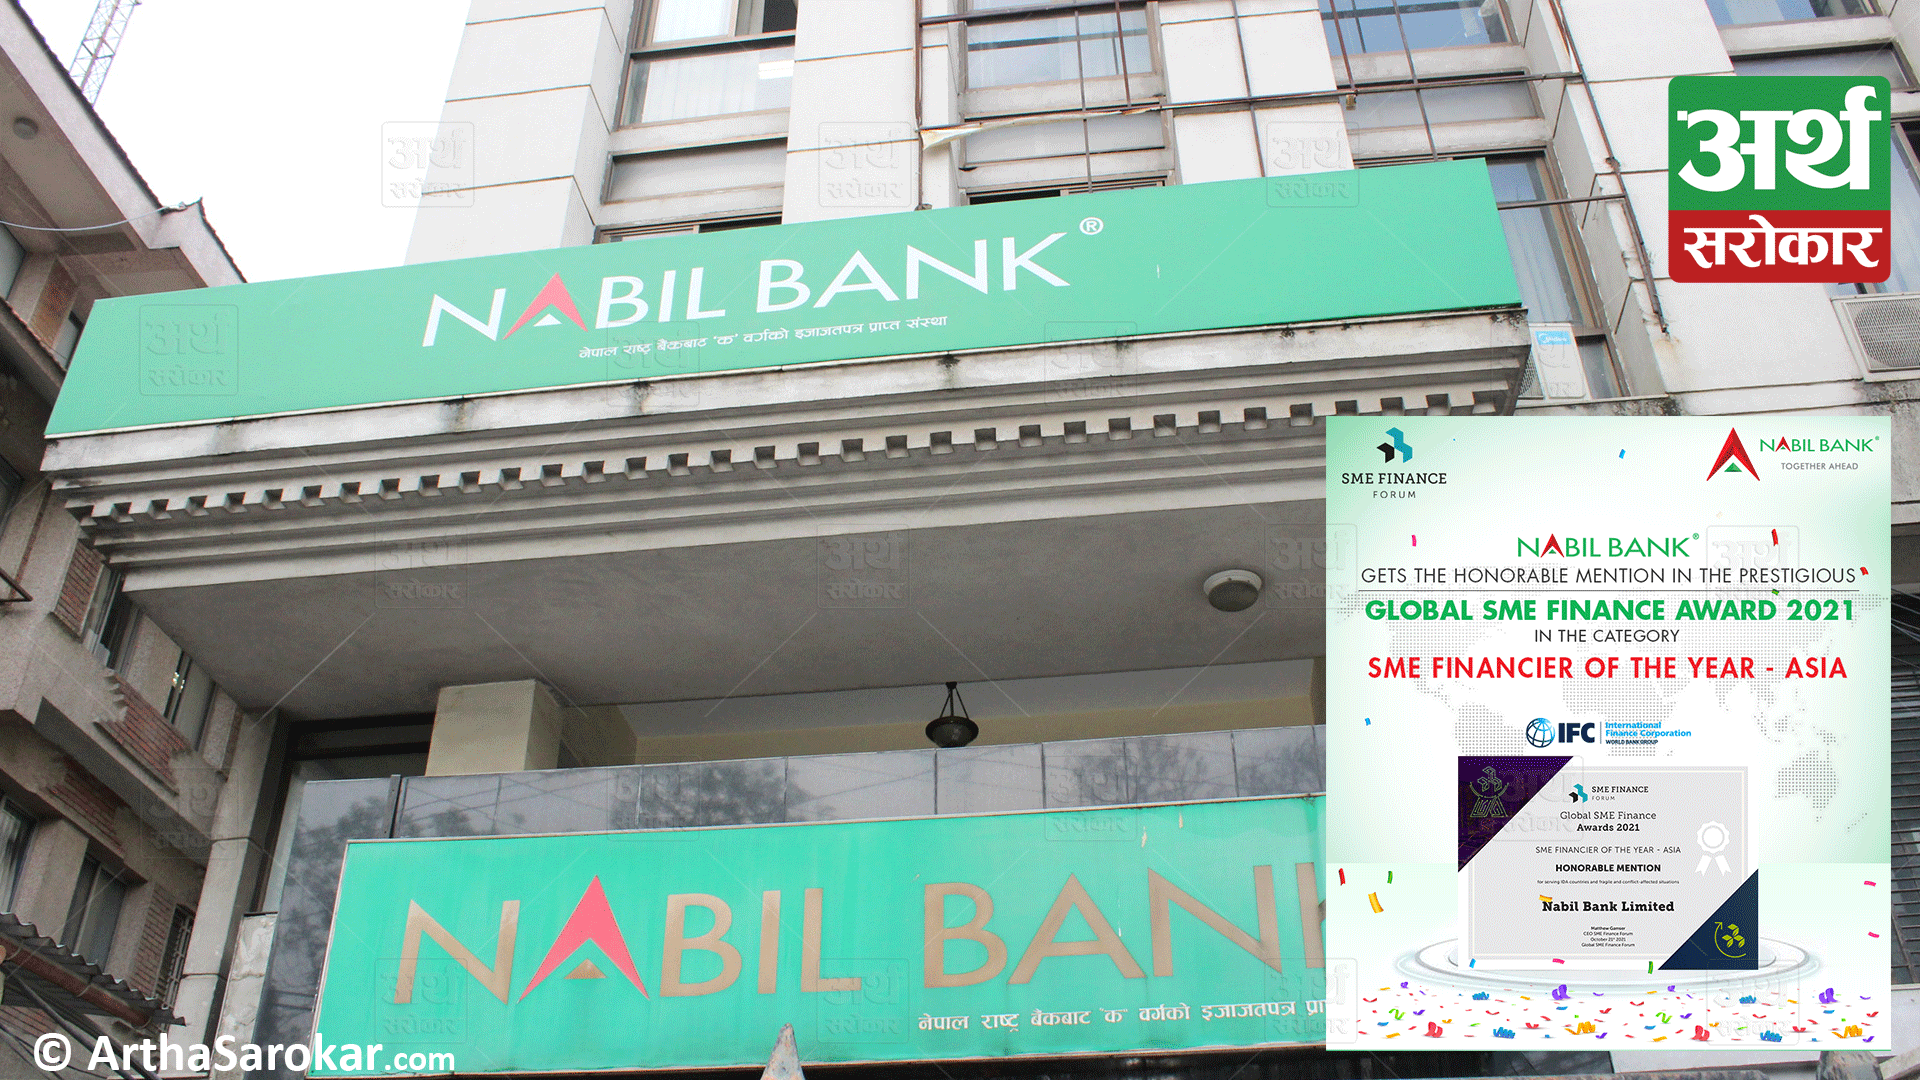 Nabil Bank receives Honorable Mention at the 2021 Global SME Finance Awards